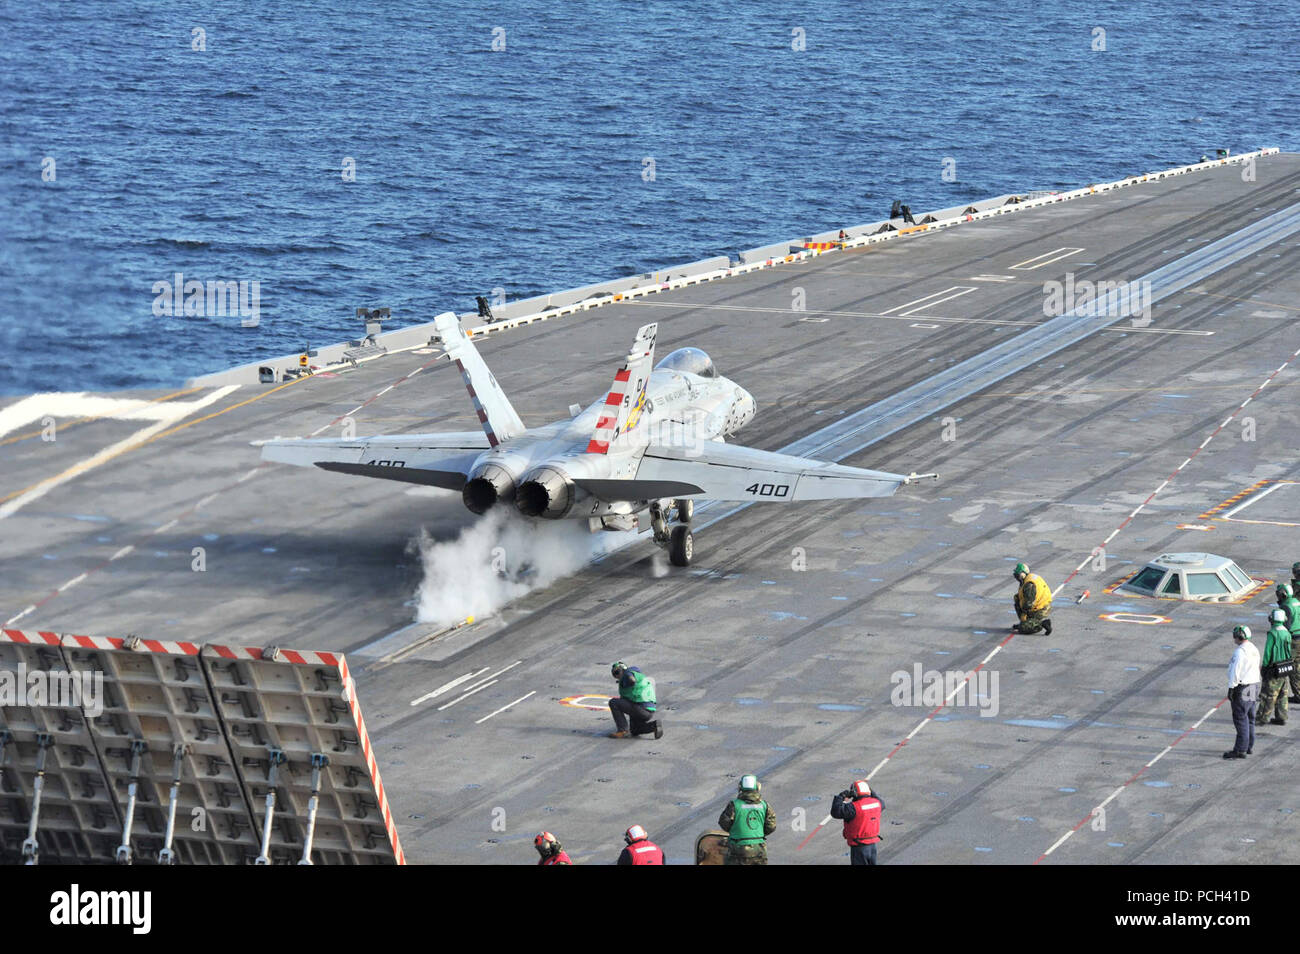 A U.S. Navy F/A-18C Hornet aircraft assigned to Strike Aircraft Test Squadron (VX) 23 takes off from the flight deck of the aircraft carrier USS Theodore Roosevelt (CVN 71) Nov. 16, 2013, in the Atlantic Ocean. VX-23 was conducting tests of the Joint Precision Approach Landing System. Stock Photo